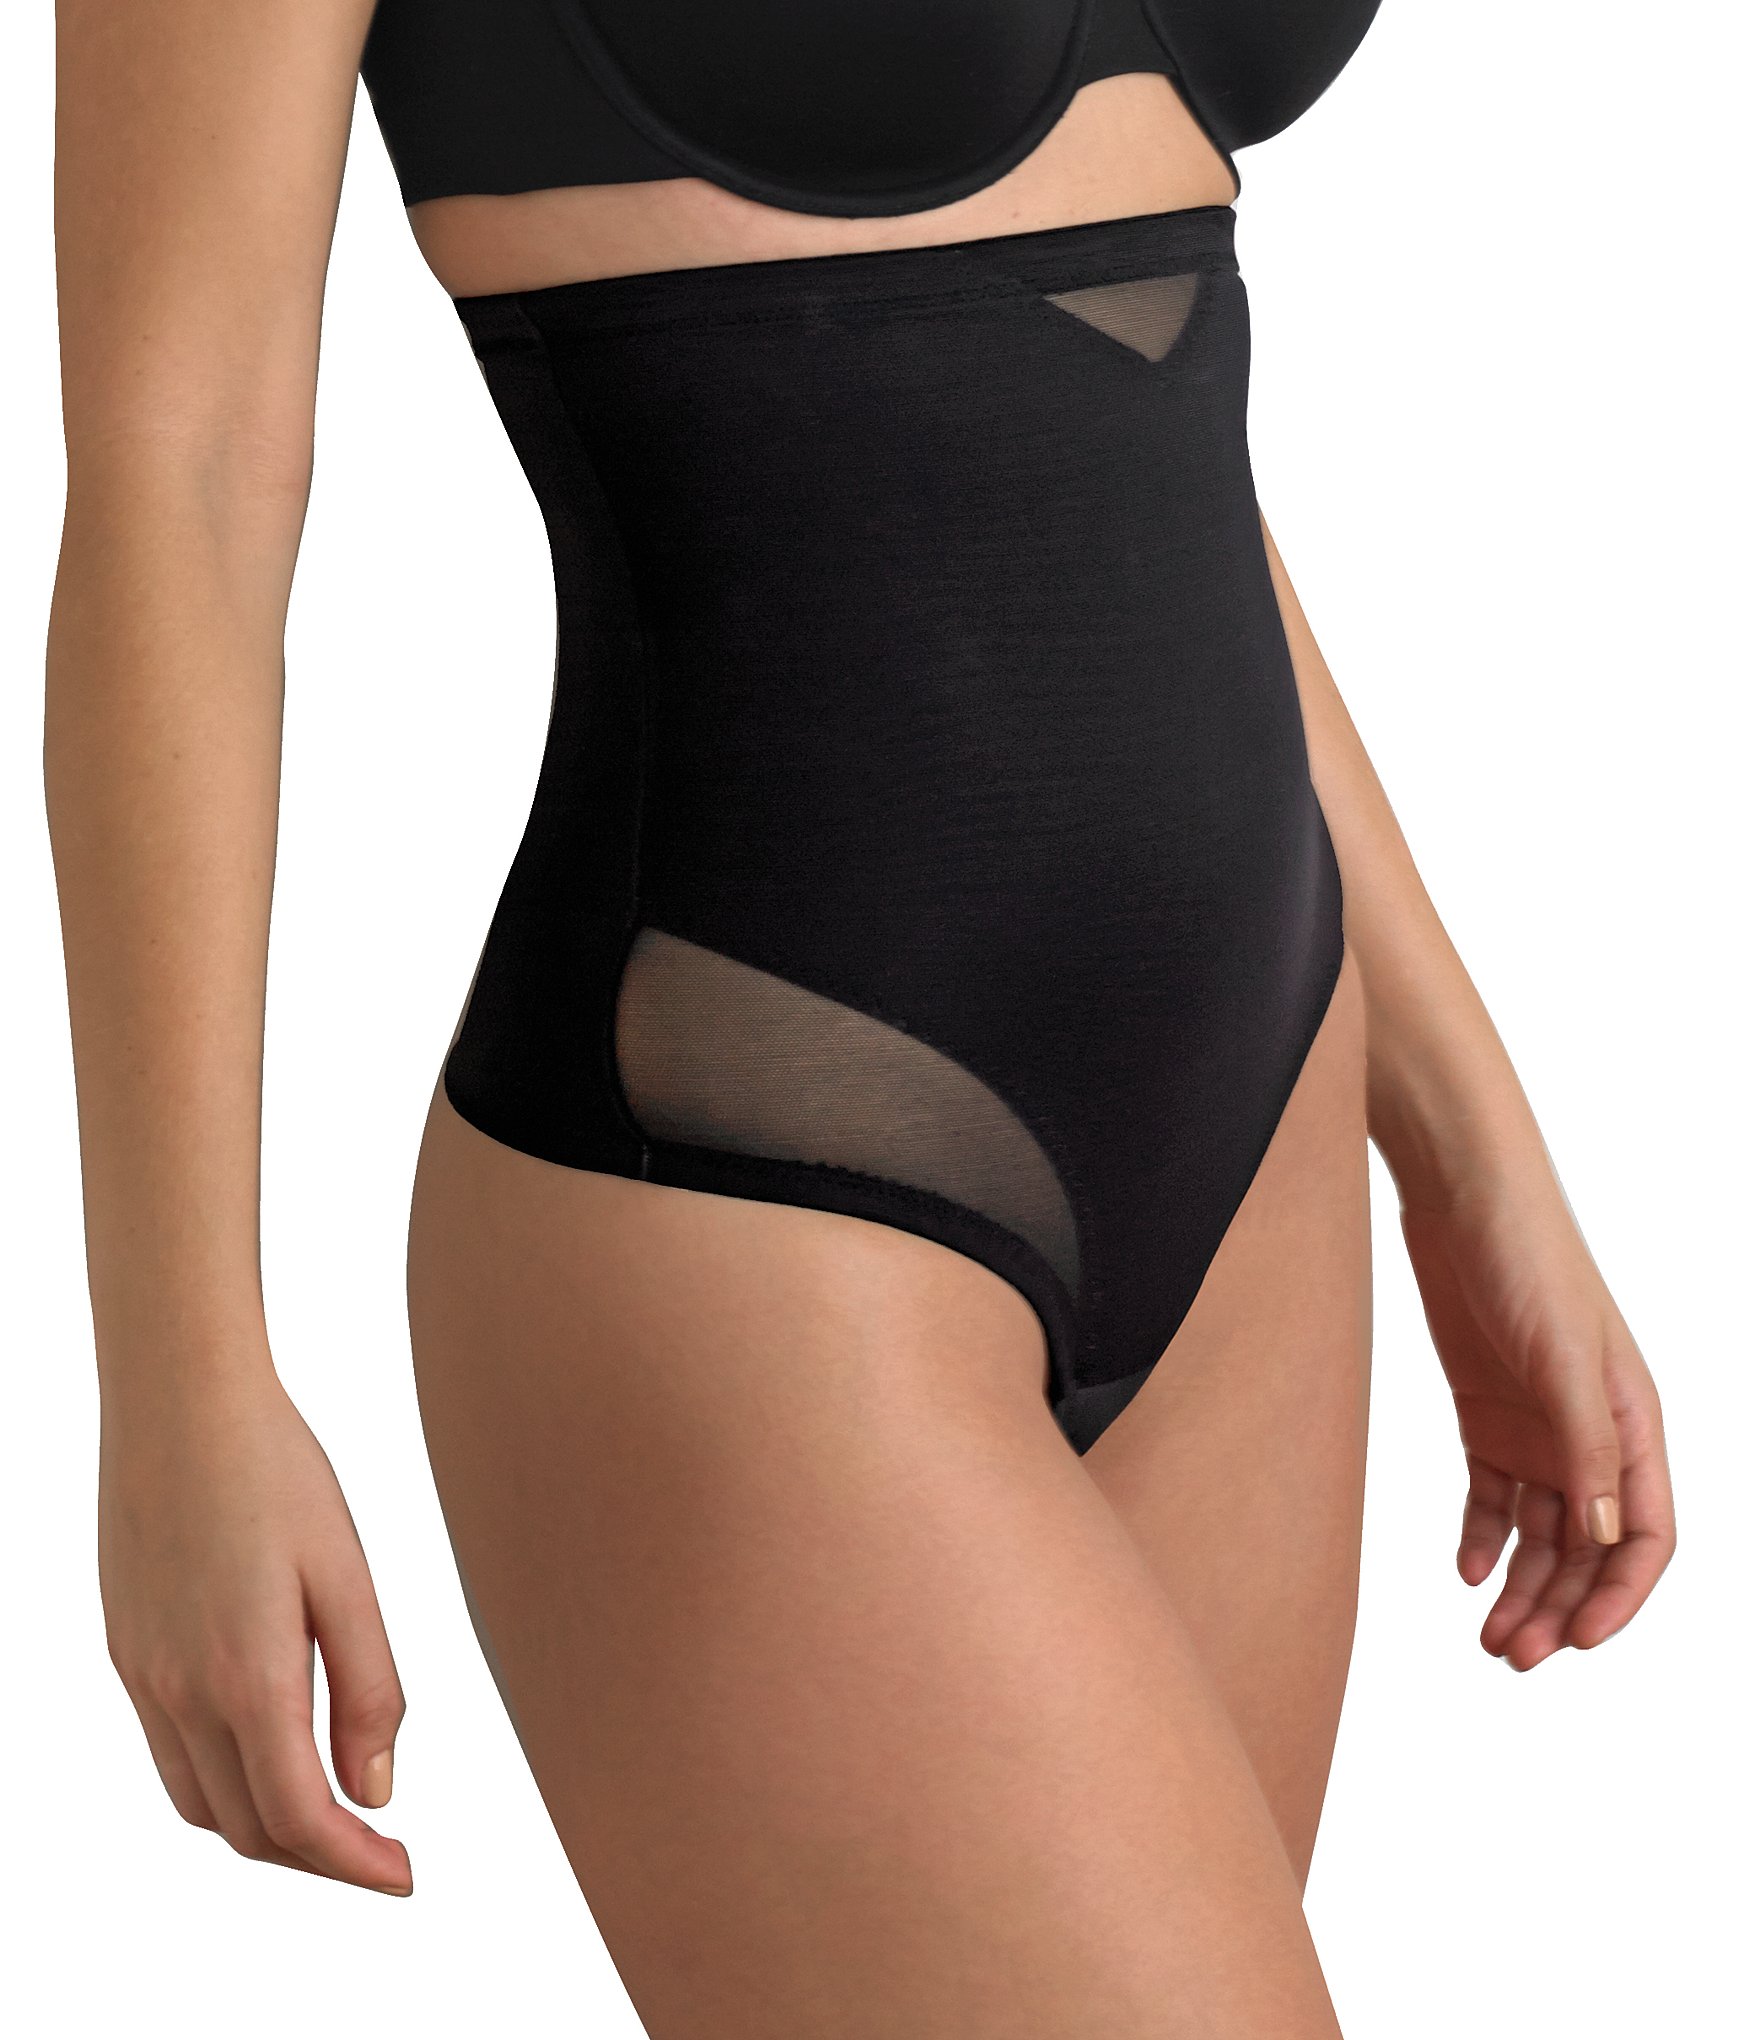 600 - High-Waisted Shapewear Thong with Tummy Control - FARMACELL USA